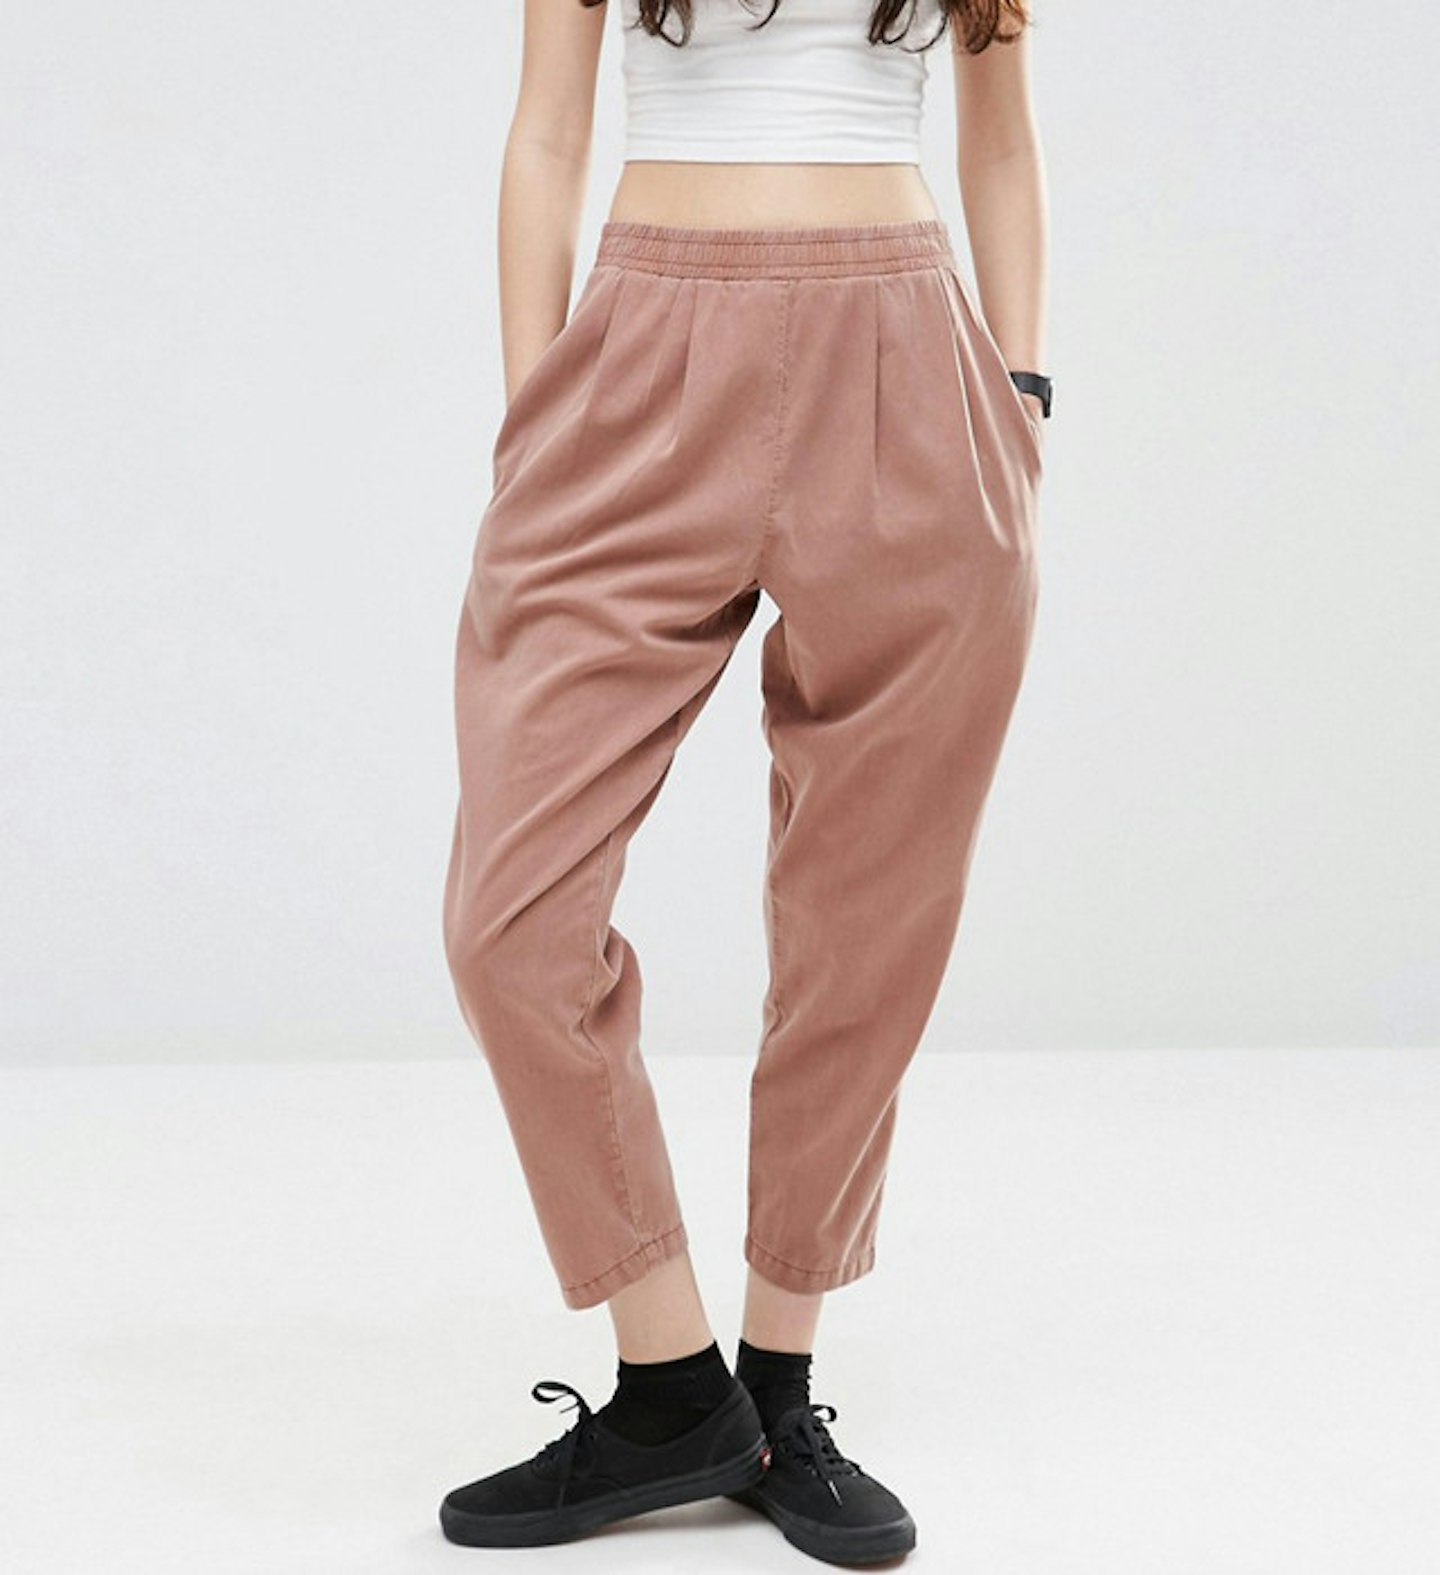 ASOS TROUSERS RESIZE